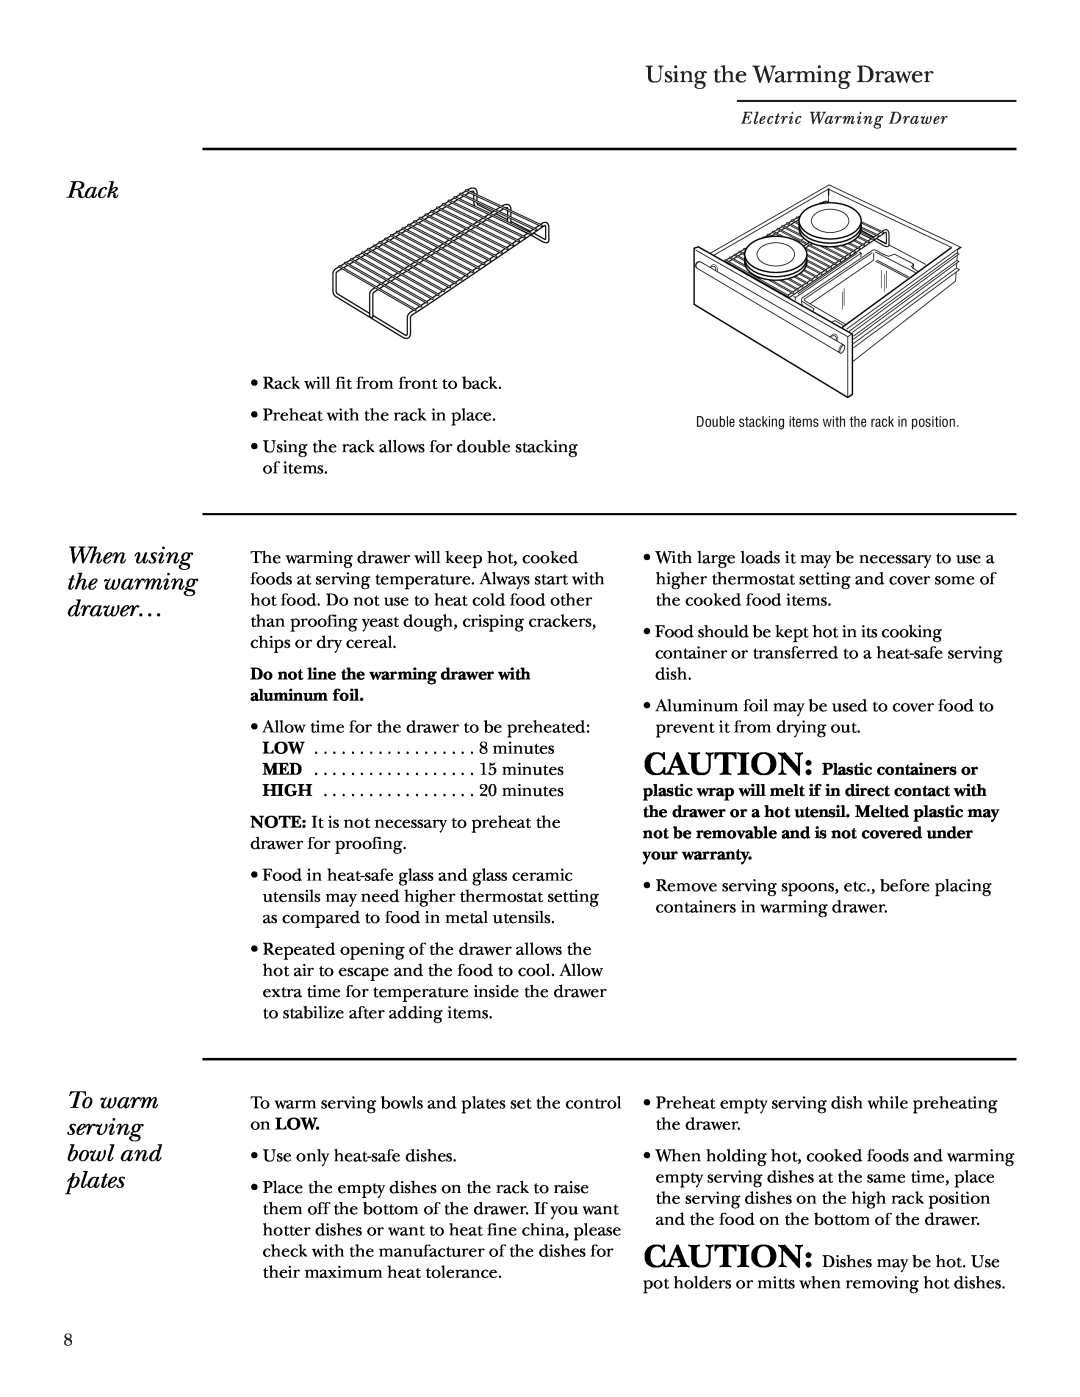 GE ZKD910 owner manual Using the Warming Drawer, Rack, When using the warming drawer…, To warm serving bowl and plates 